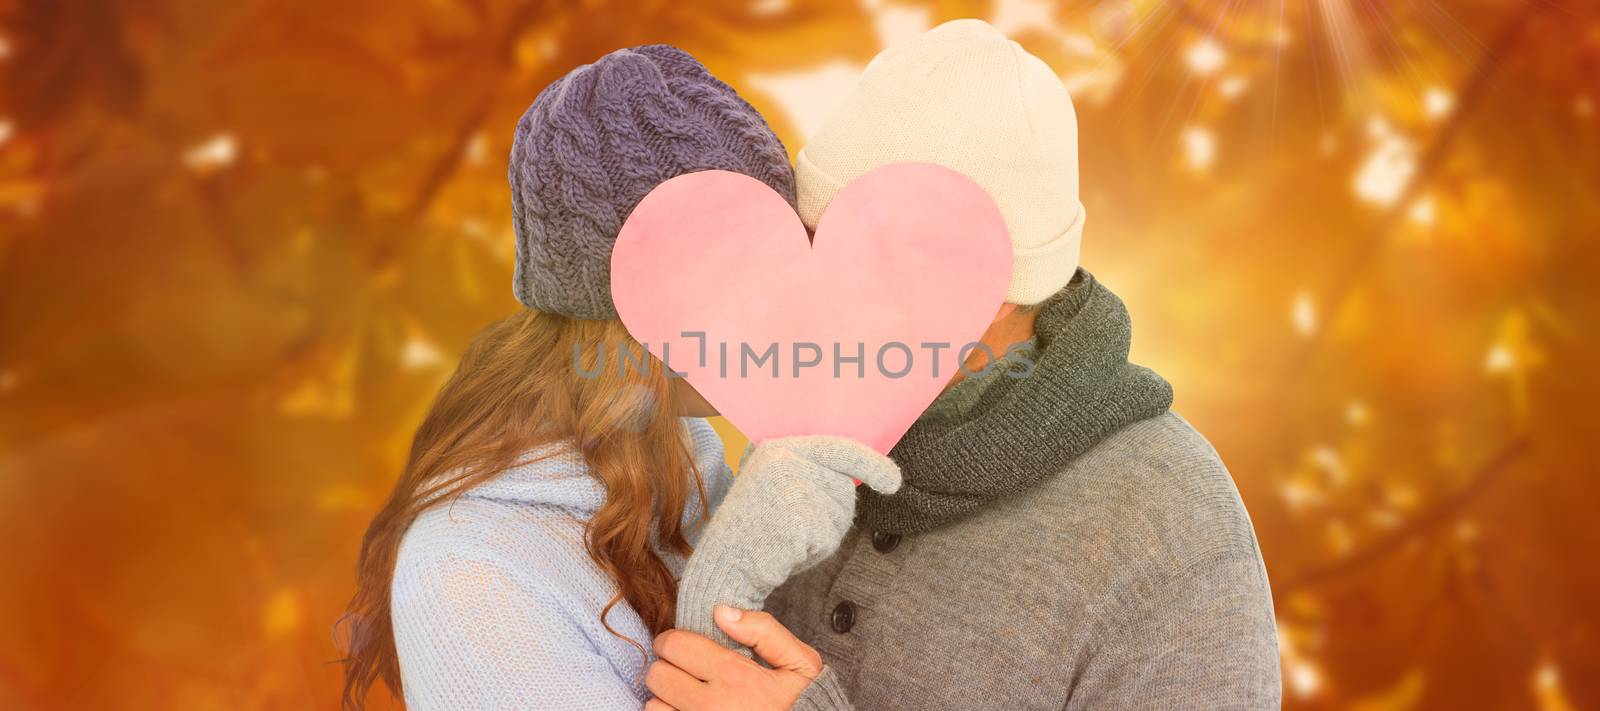 Couple in warm clothing holding heart against autumn scene